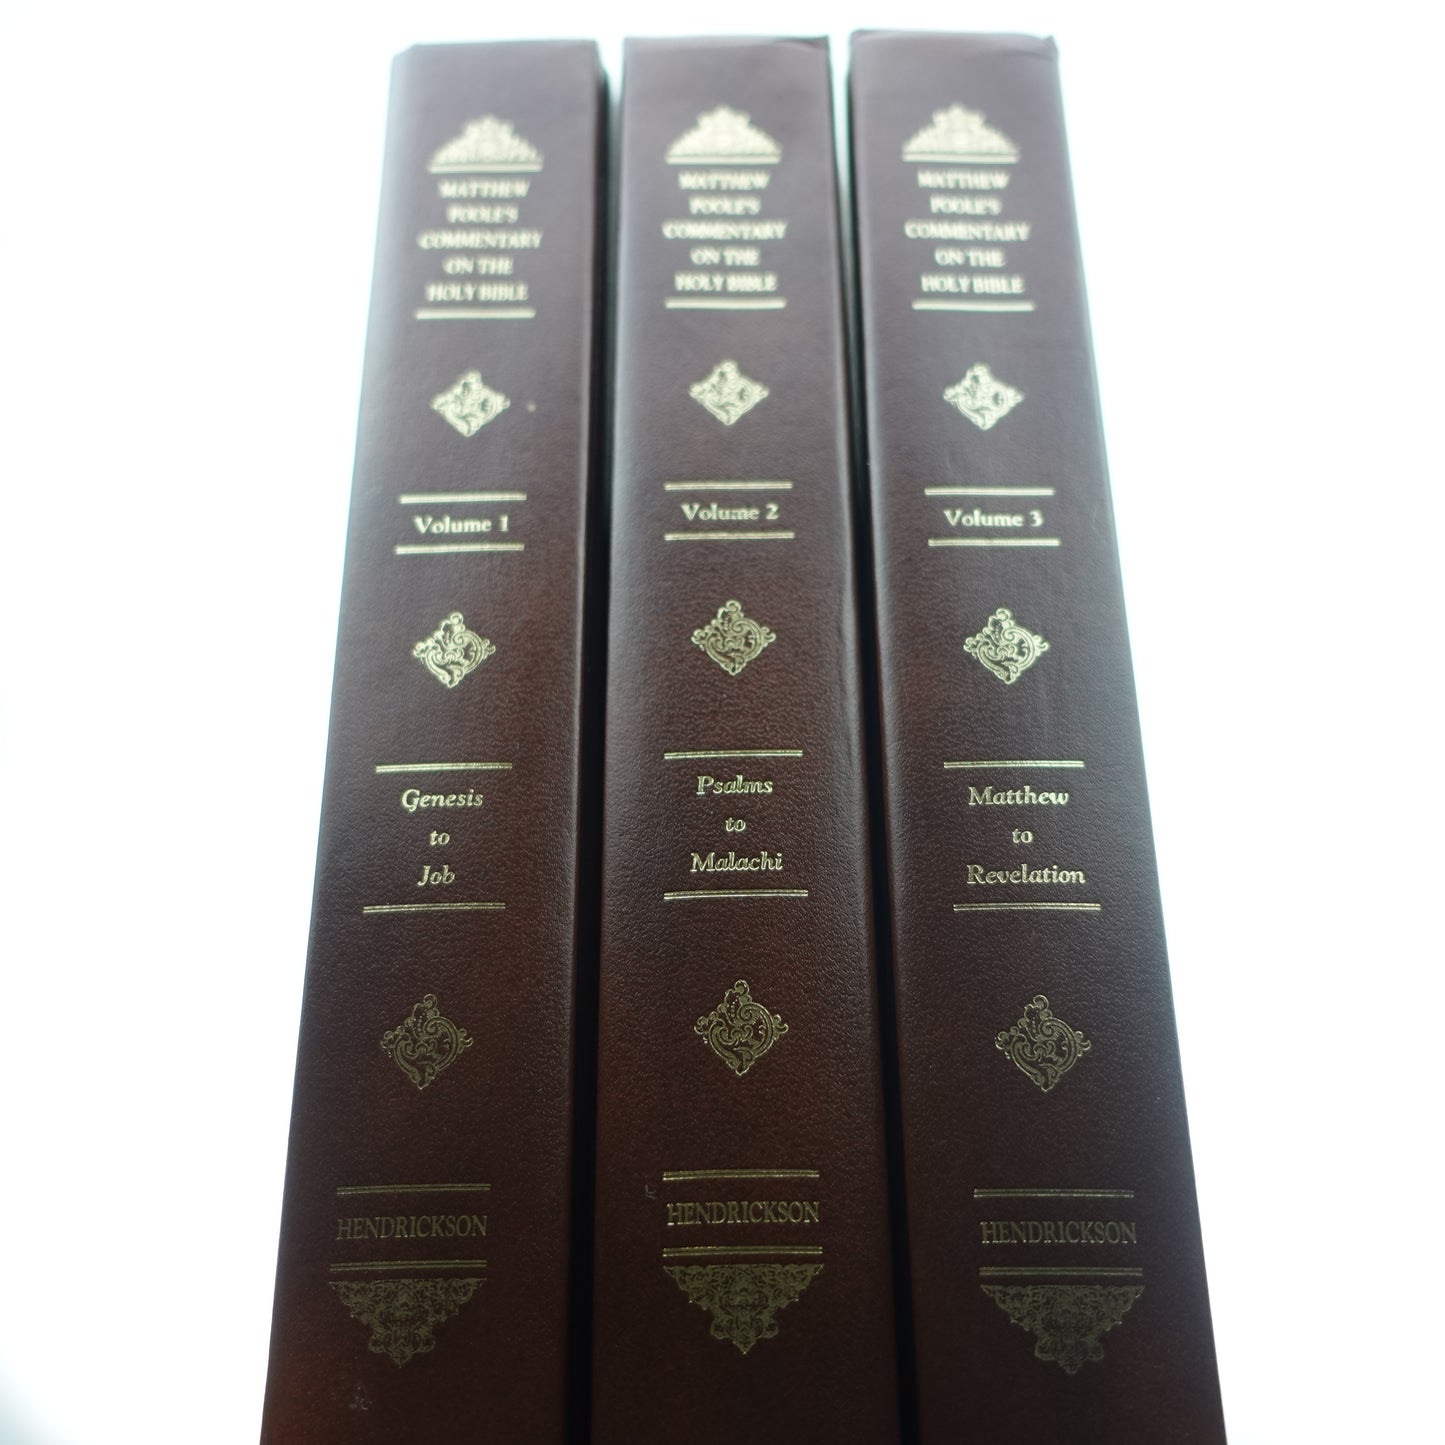 Matthew Poole's Commentary (3 Volumes)